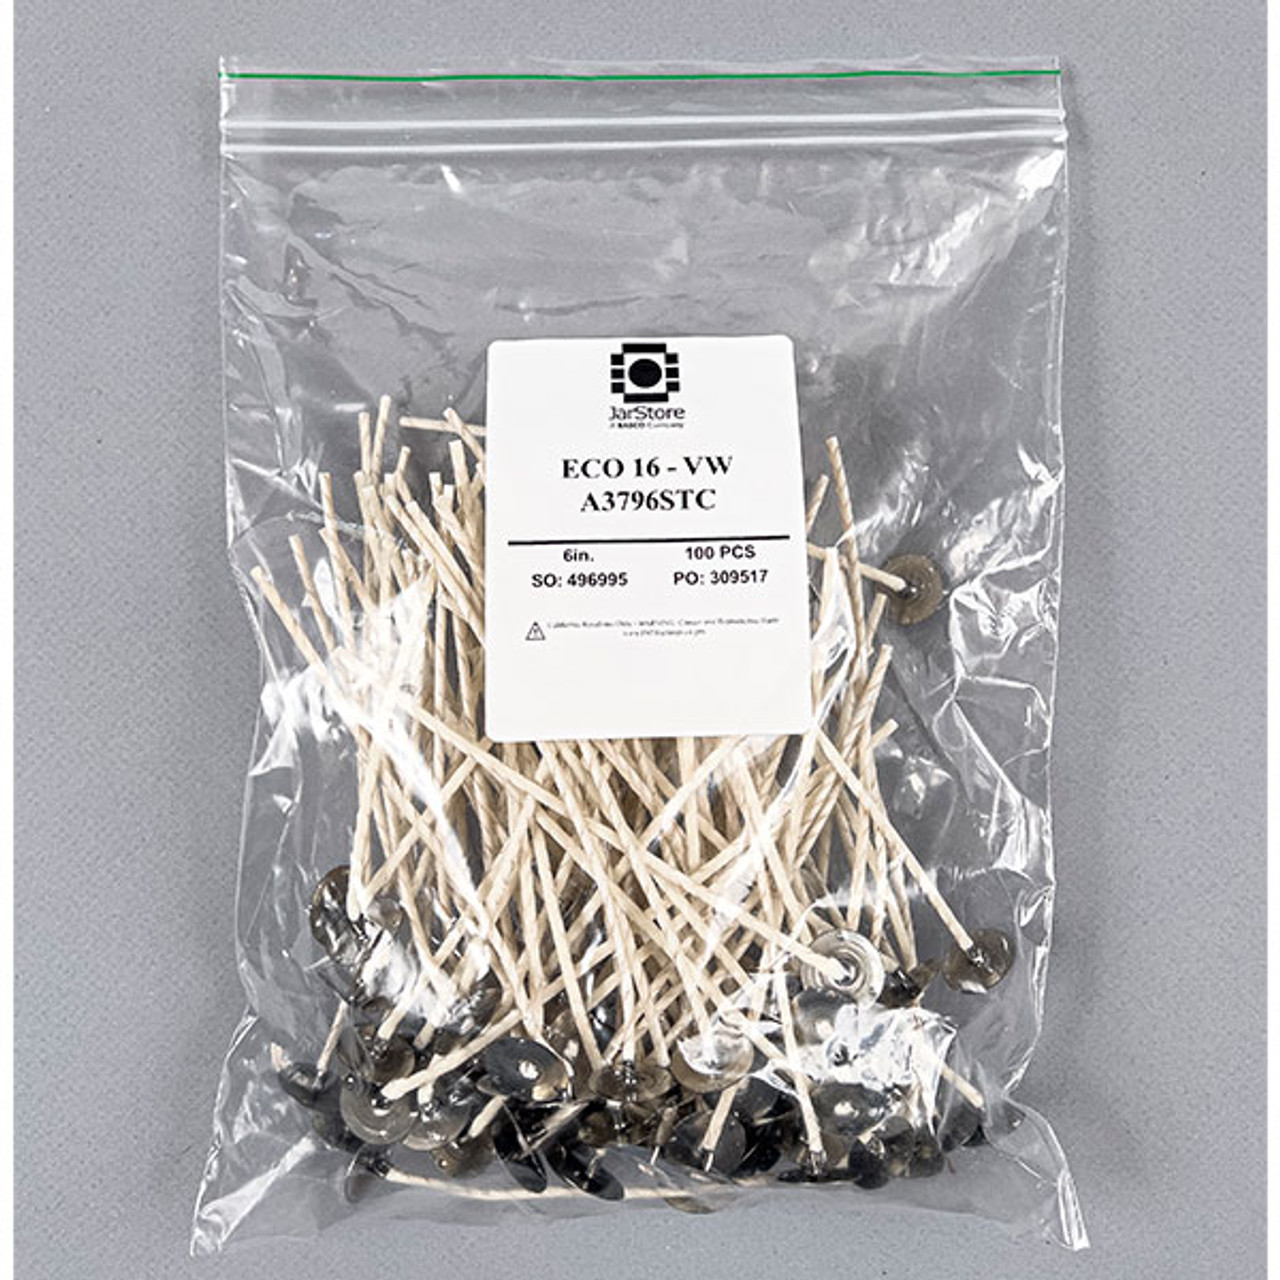 ECO 14 6 Pretabbed Wick ECO Candle Wicks 6 Inches Prewaxed, Pretabbed Pack  of 12 or 100 Low Soot Cotton Wicks Self Trimming 